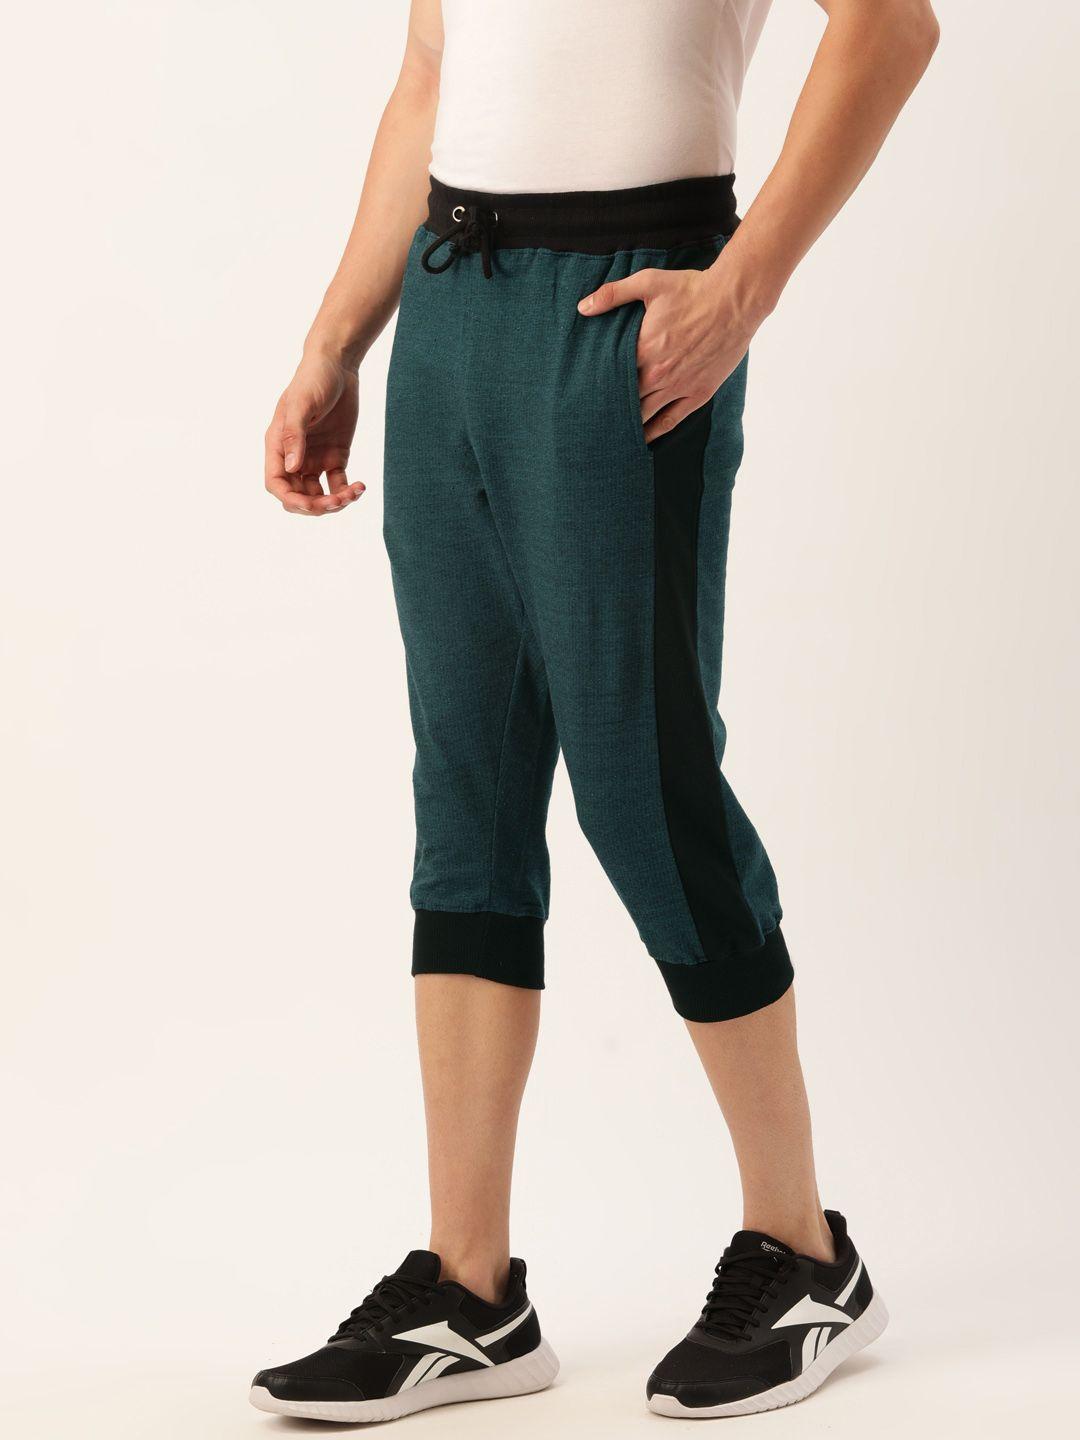 arise-men-teal-green-solid-3/4th-shorts